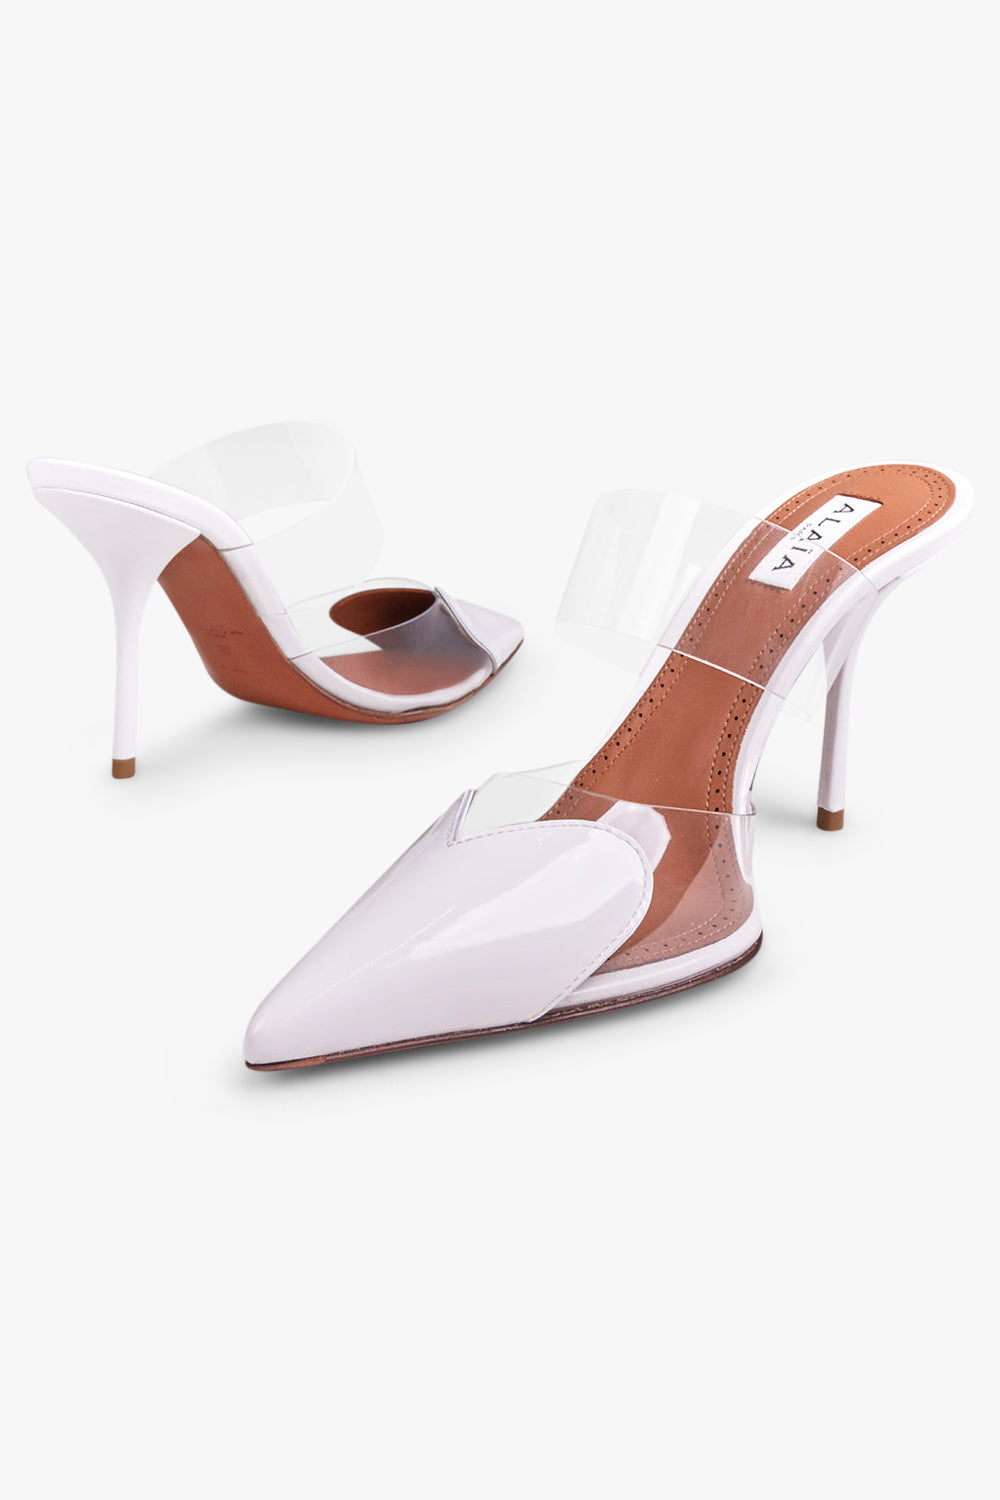 ALAIA SHOES Patent Calfskin 90mm Heart Mules | White